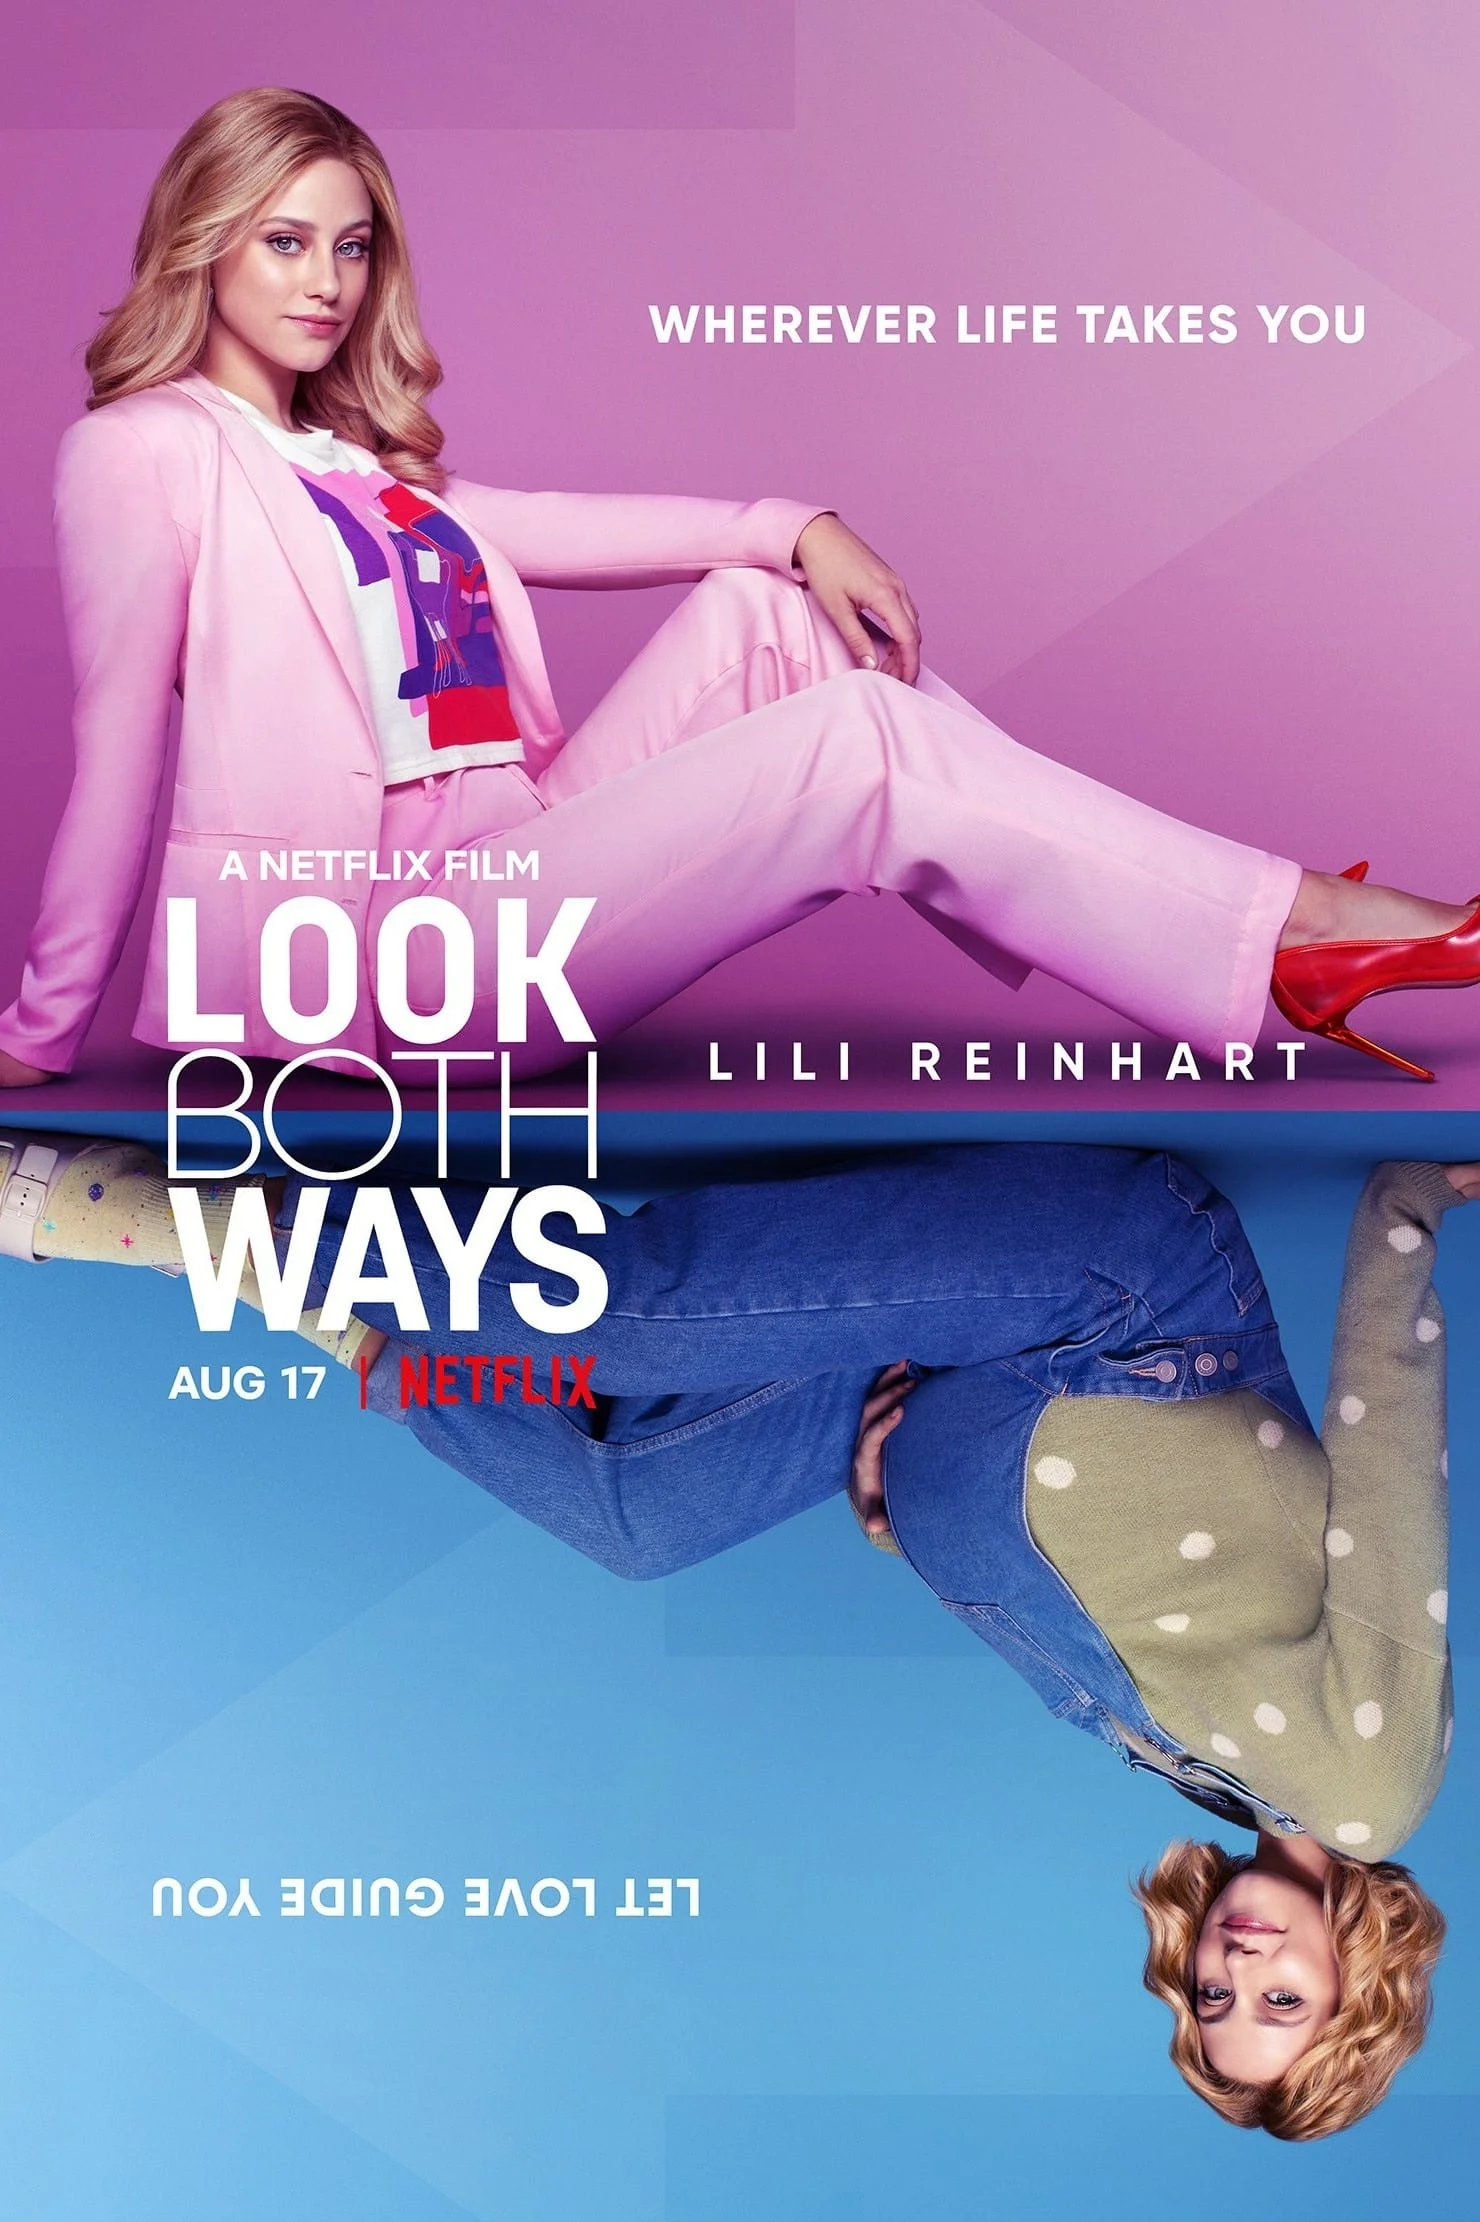 Netflix romantic comedy "Look Both Ways" release official trailer and poster, it will be released on August 17 | FMV6